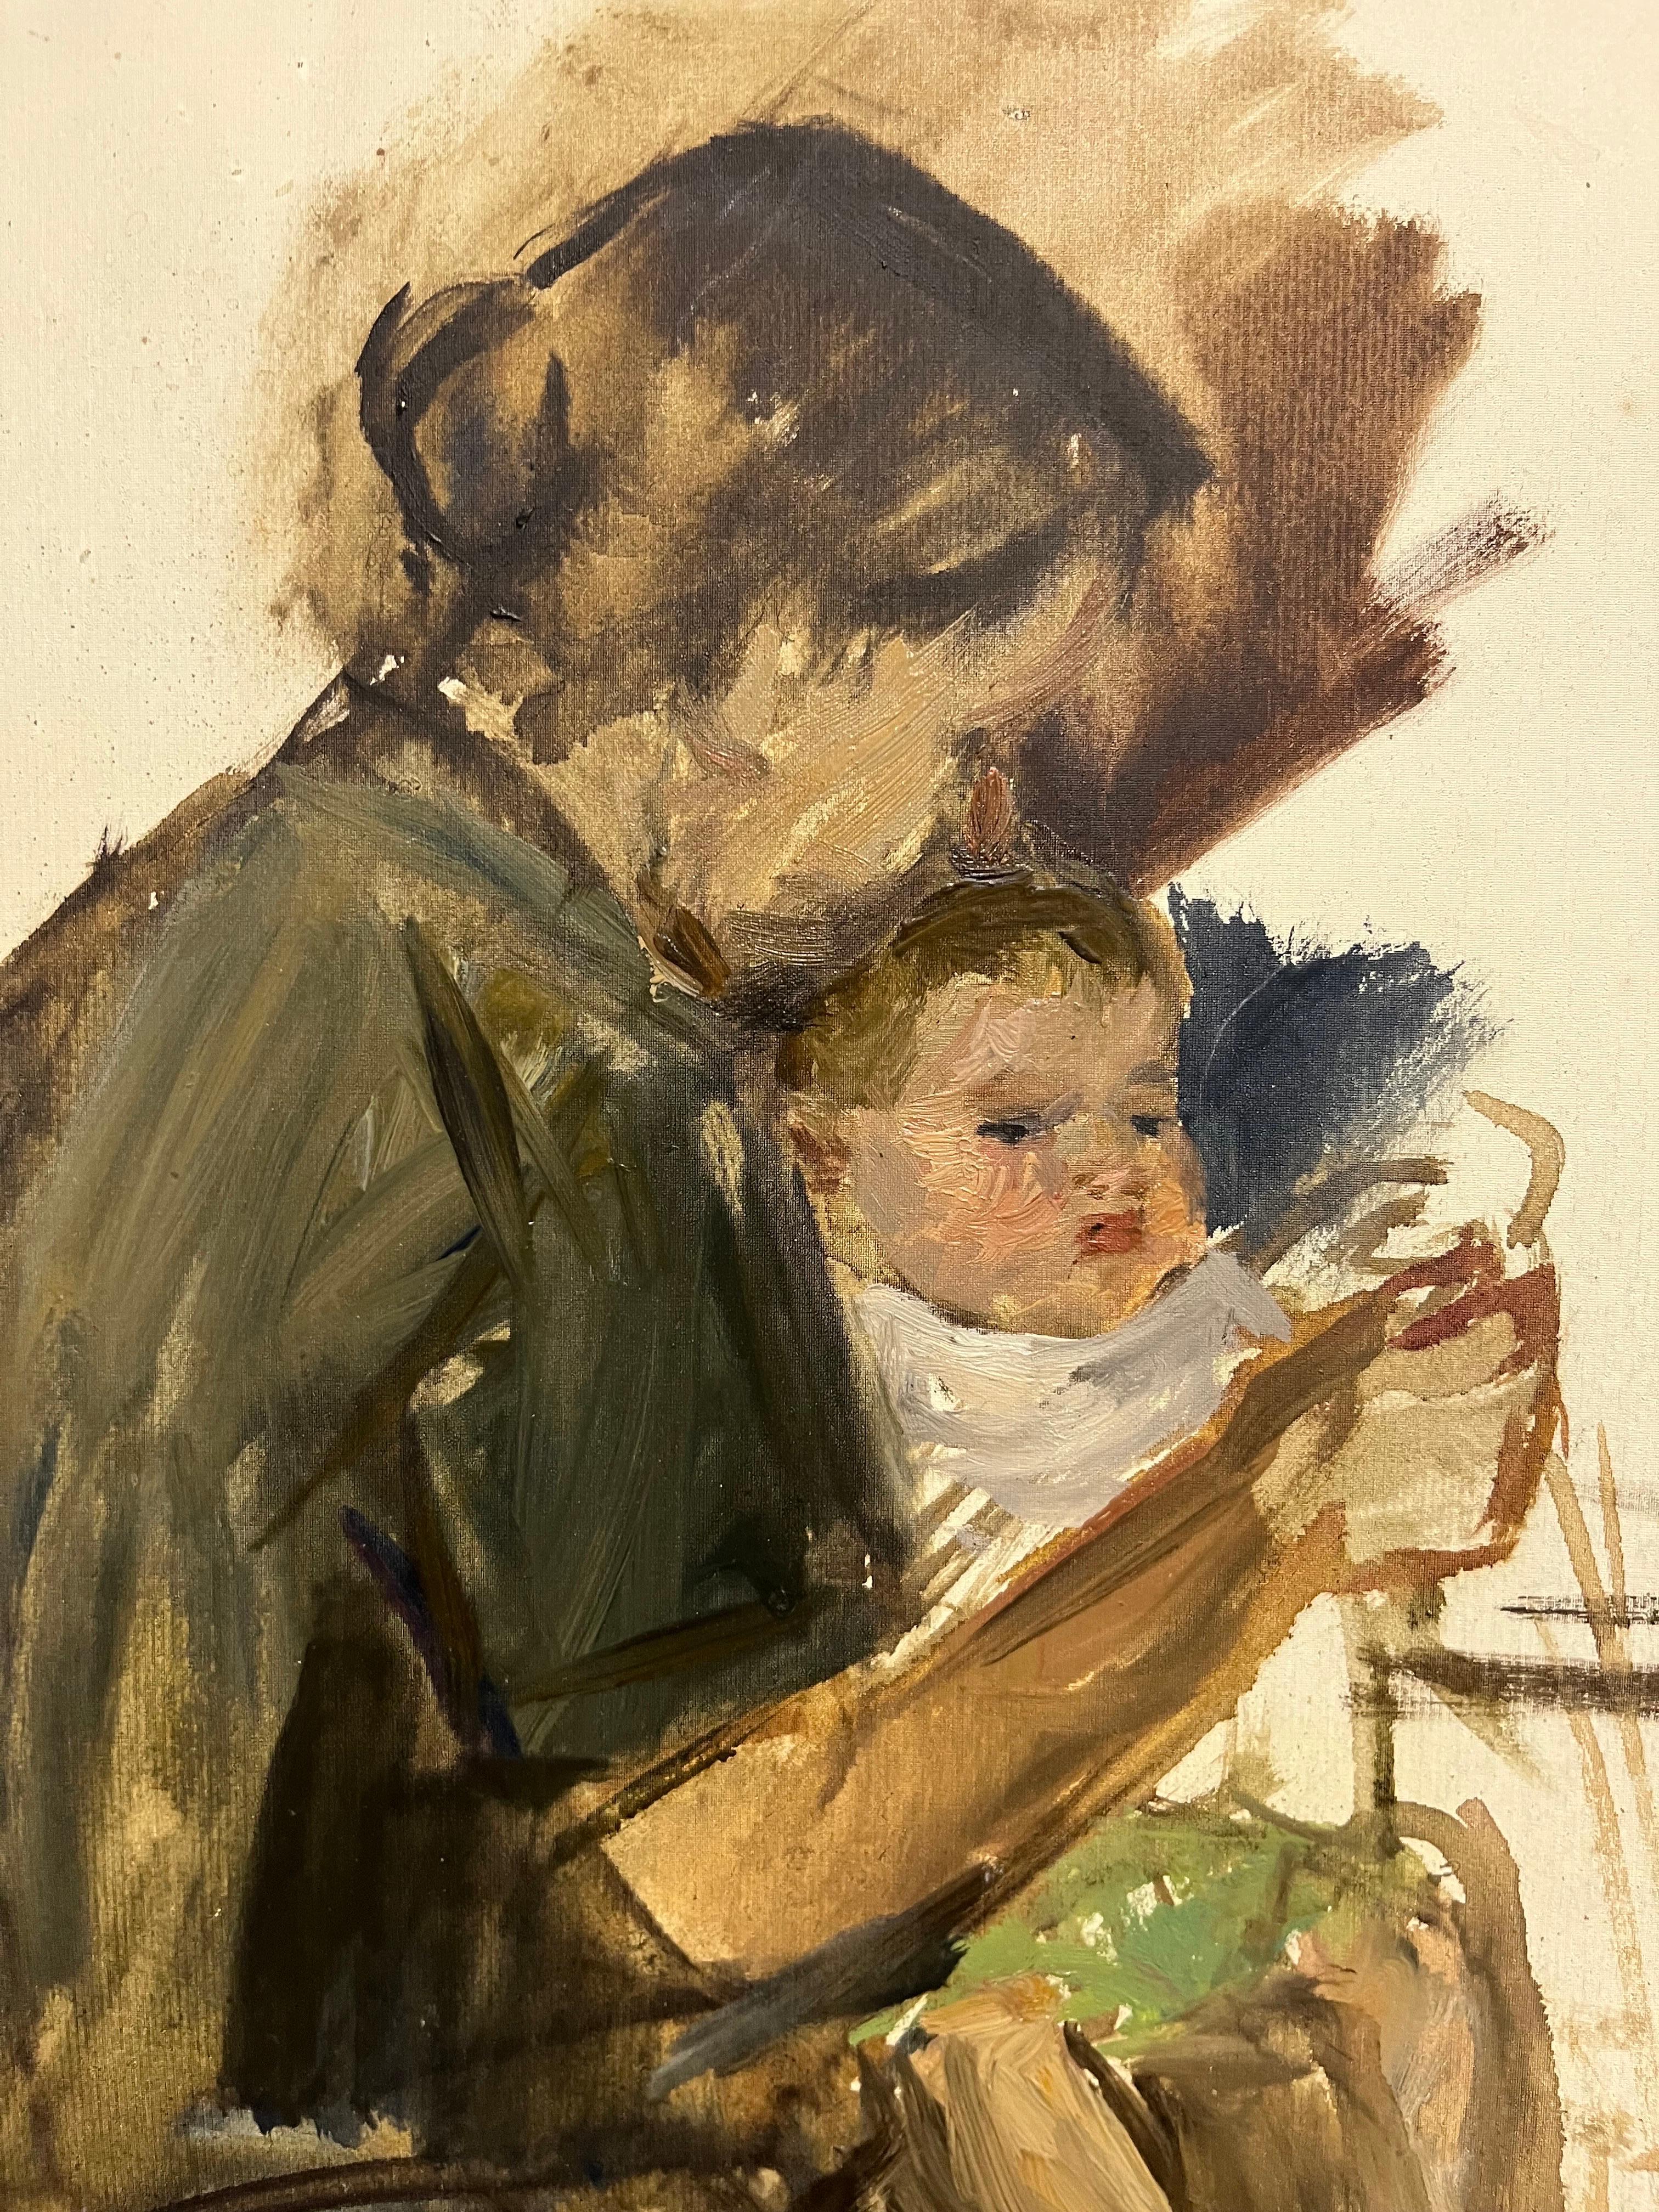 Mom, birth, baby, green, motherhood, Mother's Day
KLARA VLASOVA  (Moscow, 1926-2022)

MUSEUMS

 St. Petersburg, State Russian Museum
Moscow, Pushkin Museum
Moscow, Museum of History and Reconstruction
Moscow, Museum of Lev Tolstoy
Sochi, Museum of